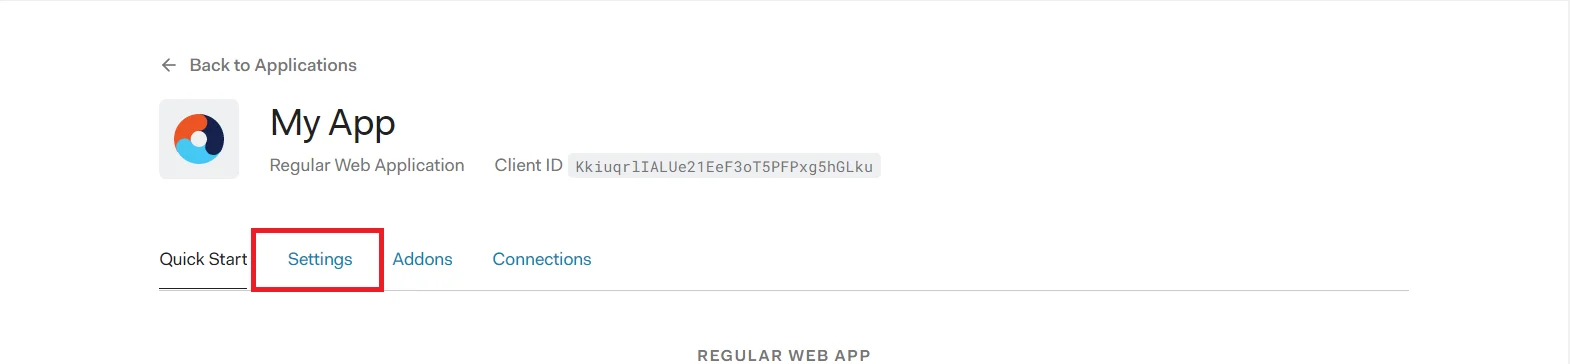 nopCommerce OAuth Single Sign-On (SSO) using Auth0 as IDP - go to setting